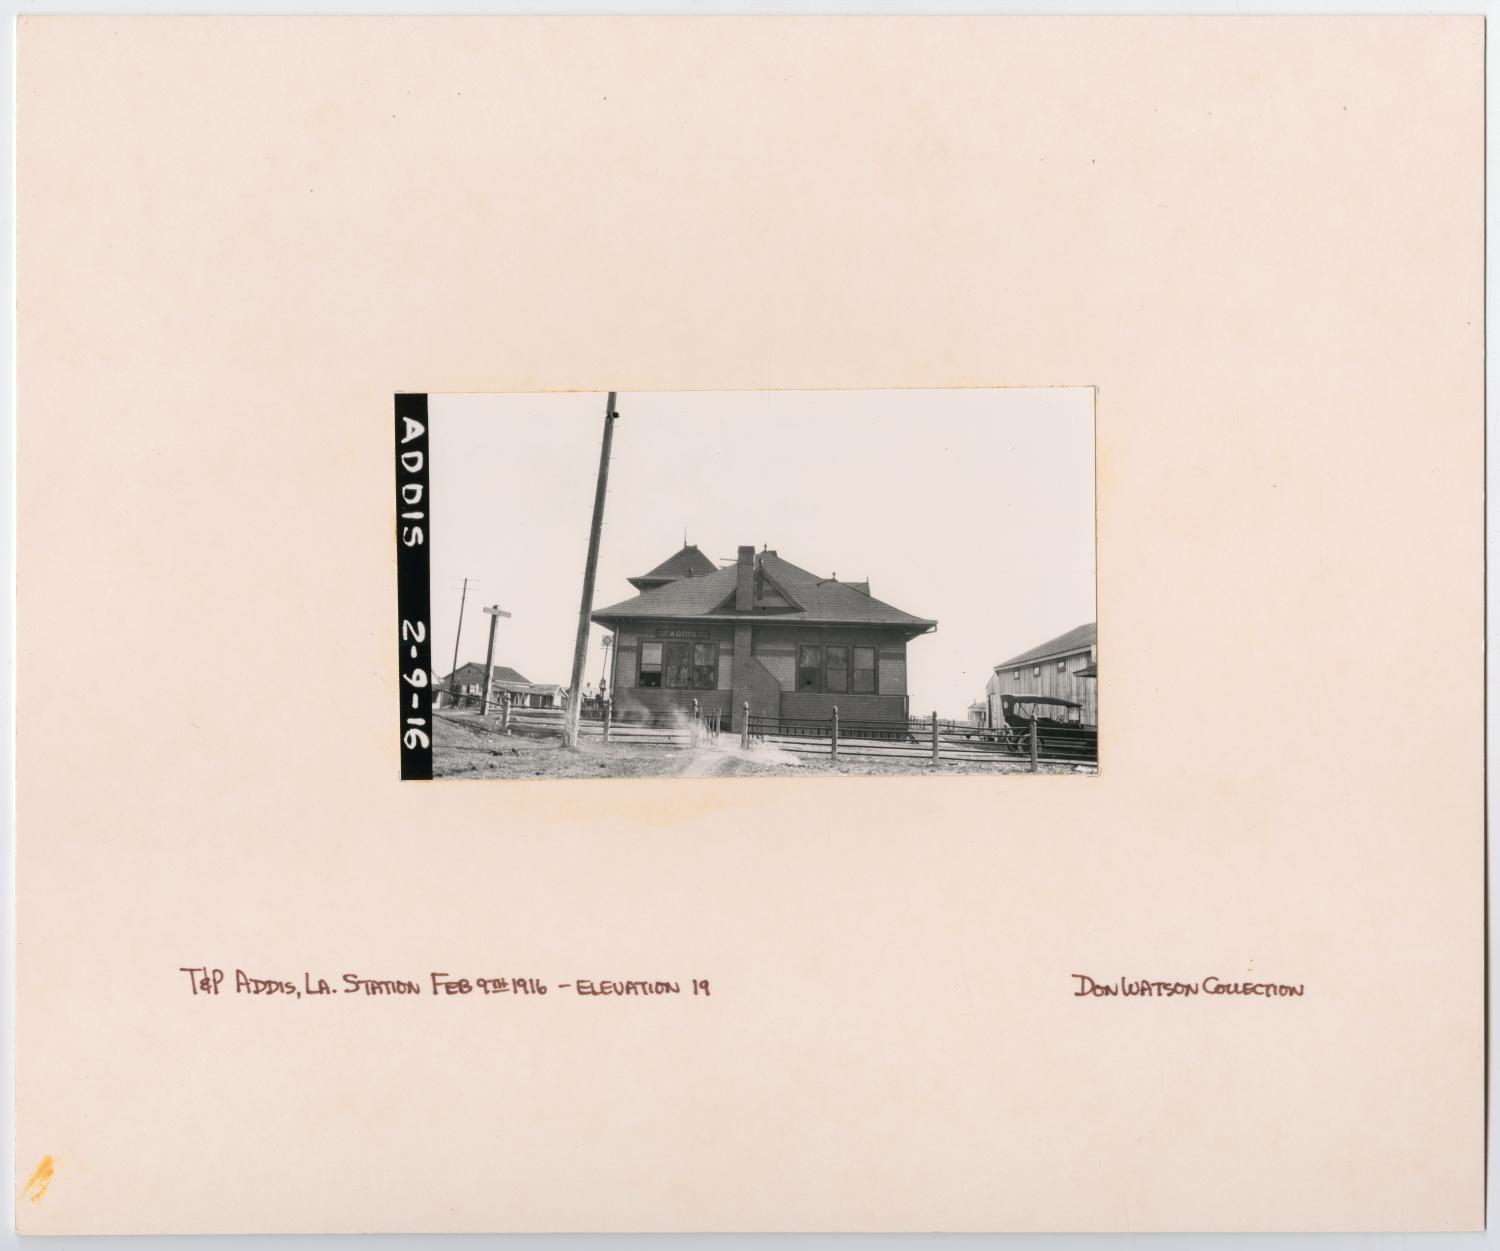 Images of Texas & Pacific Stations and Structures in Addis, LA